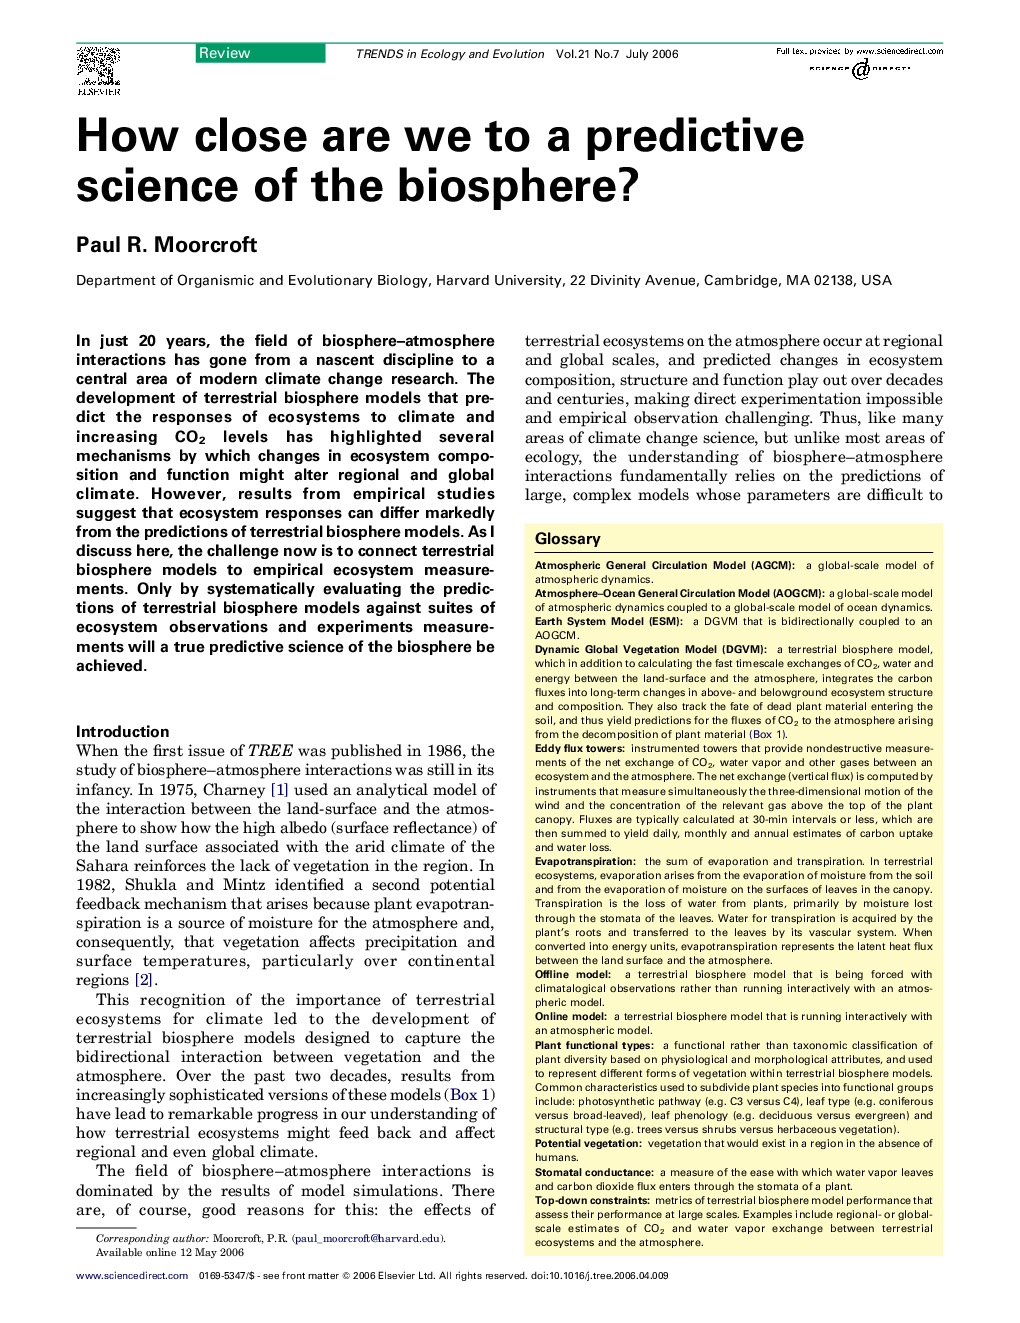 How close are we to a predictive science of the biosphere?